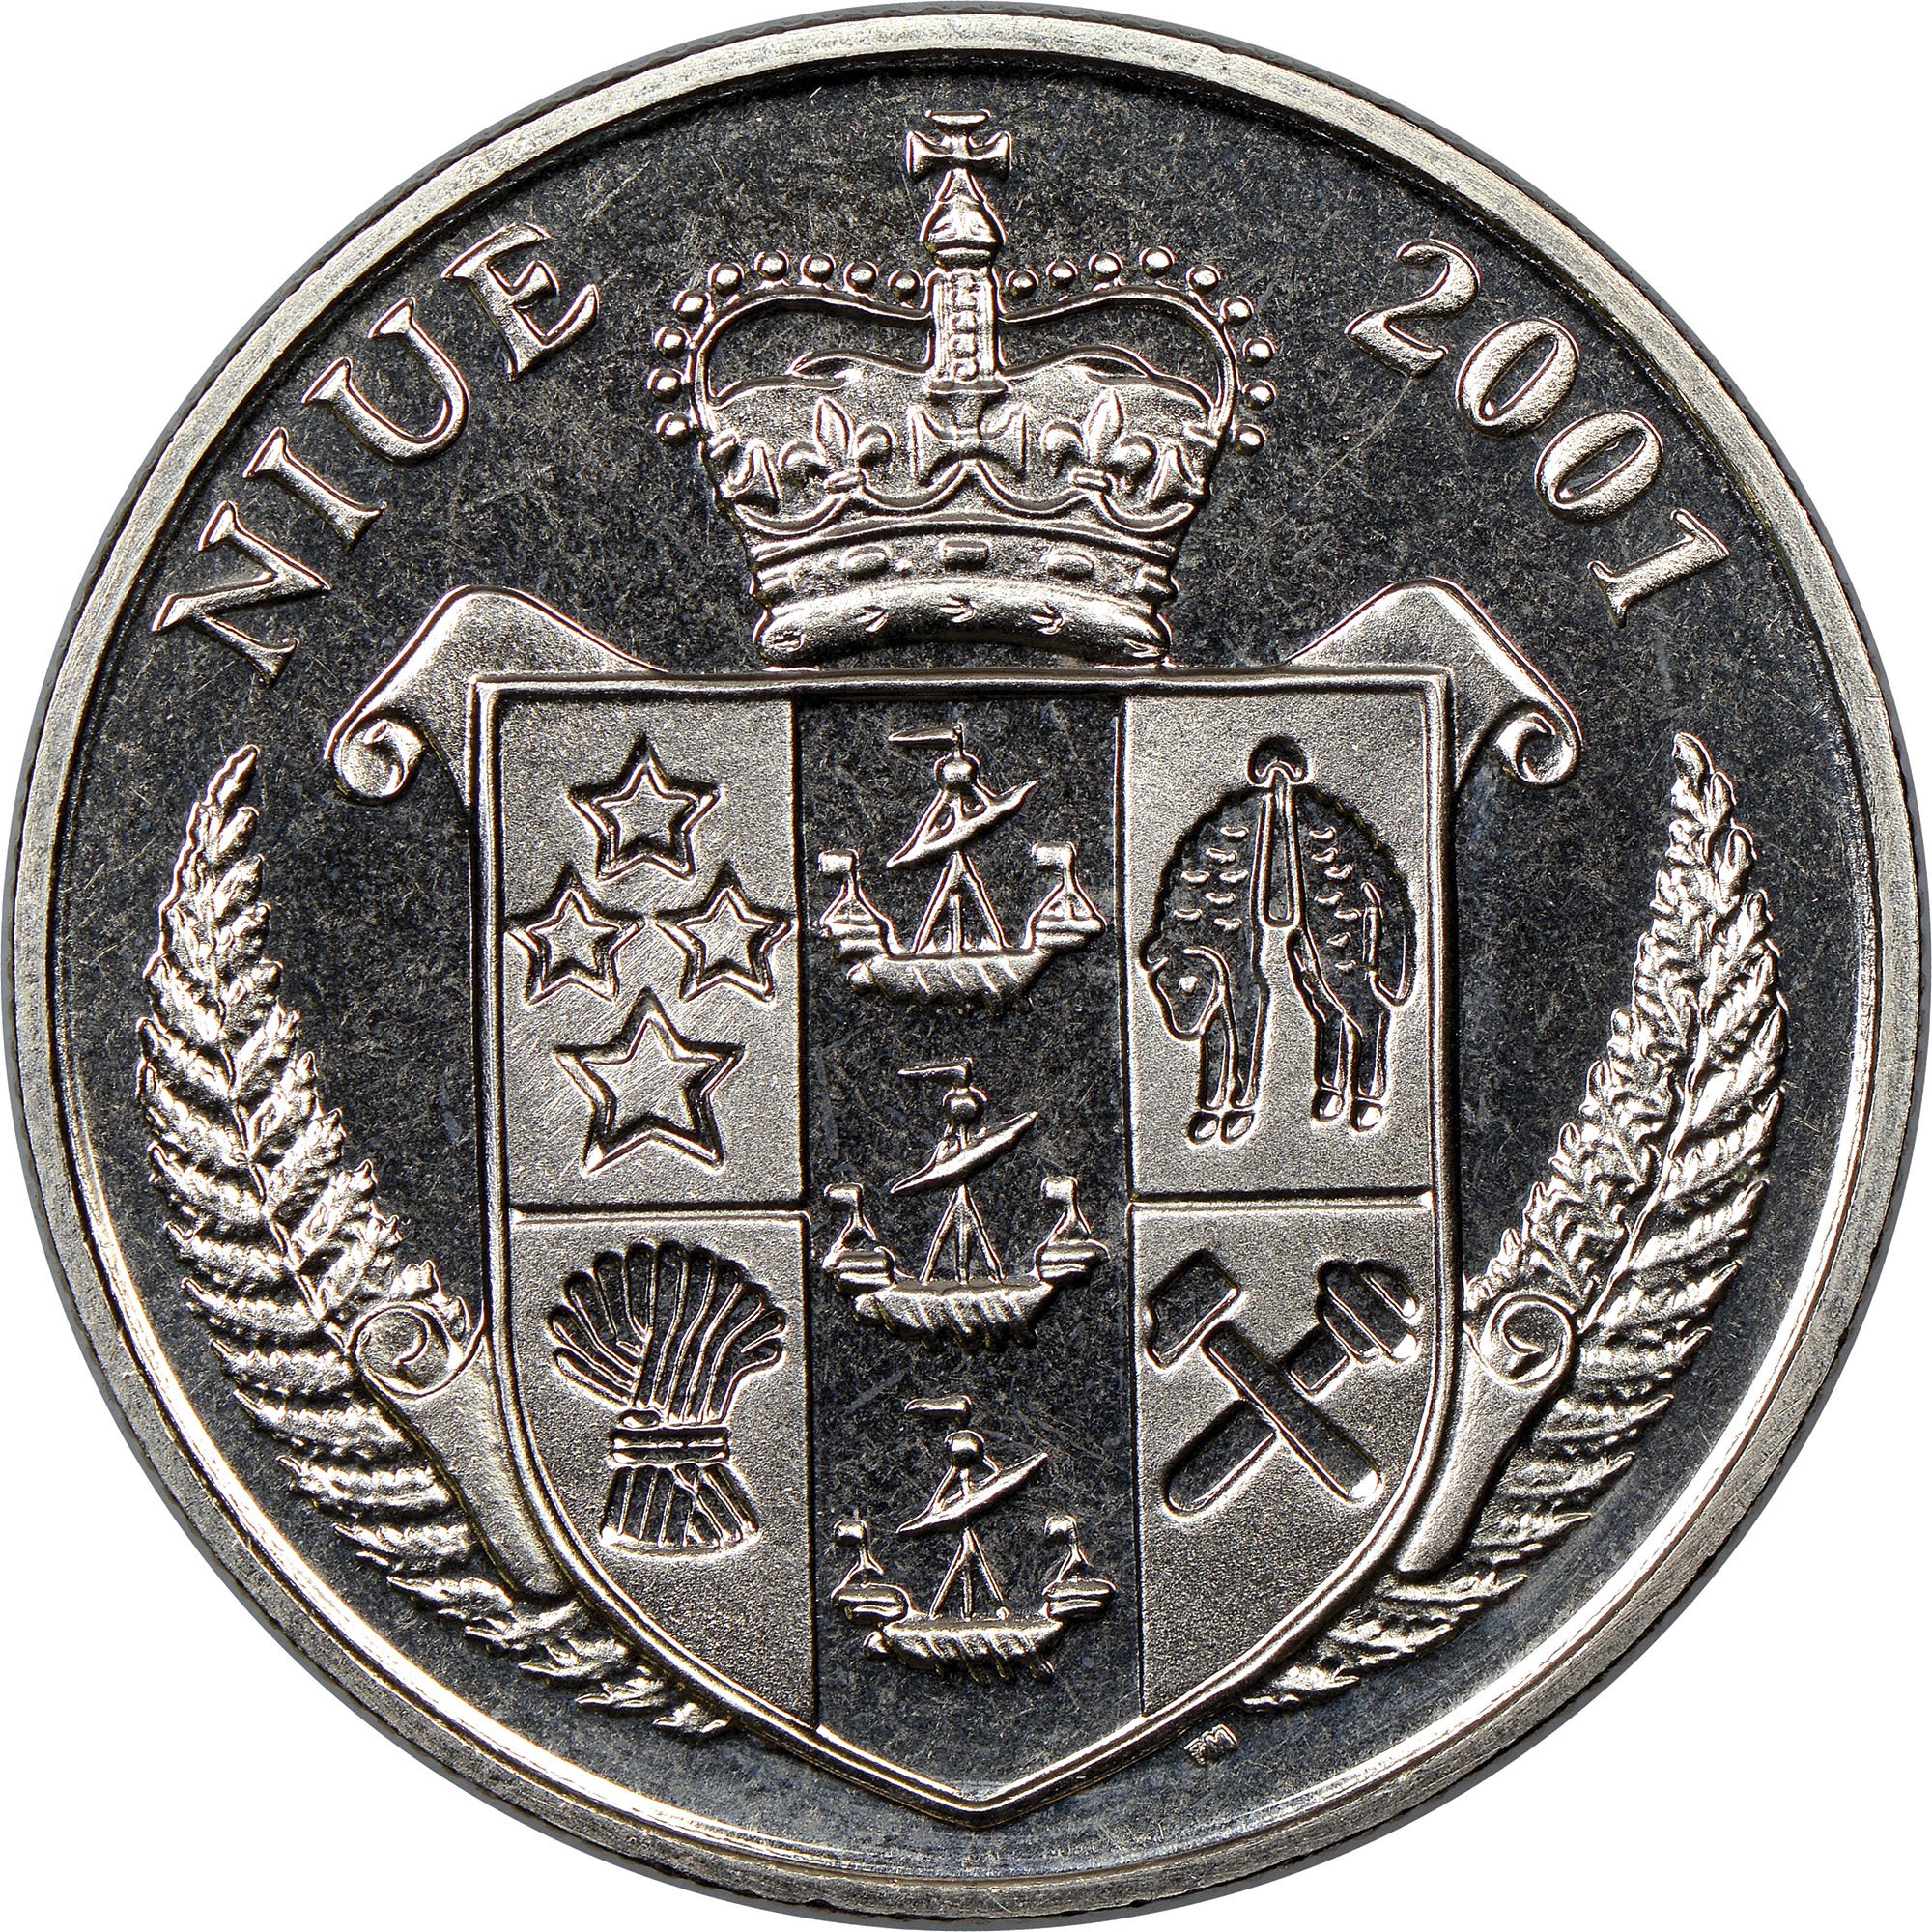 Reverse of Niue currency coin